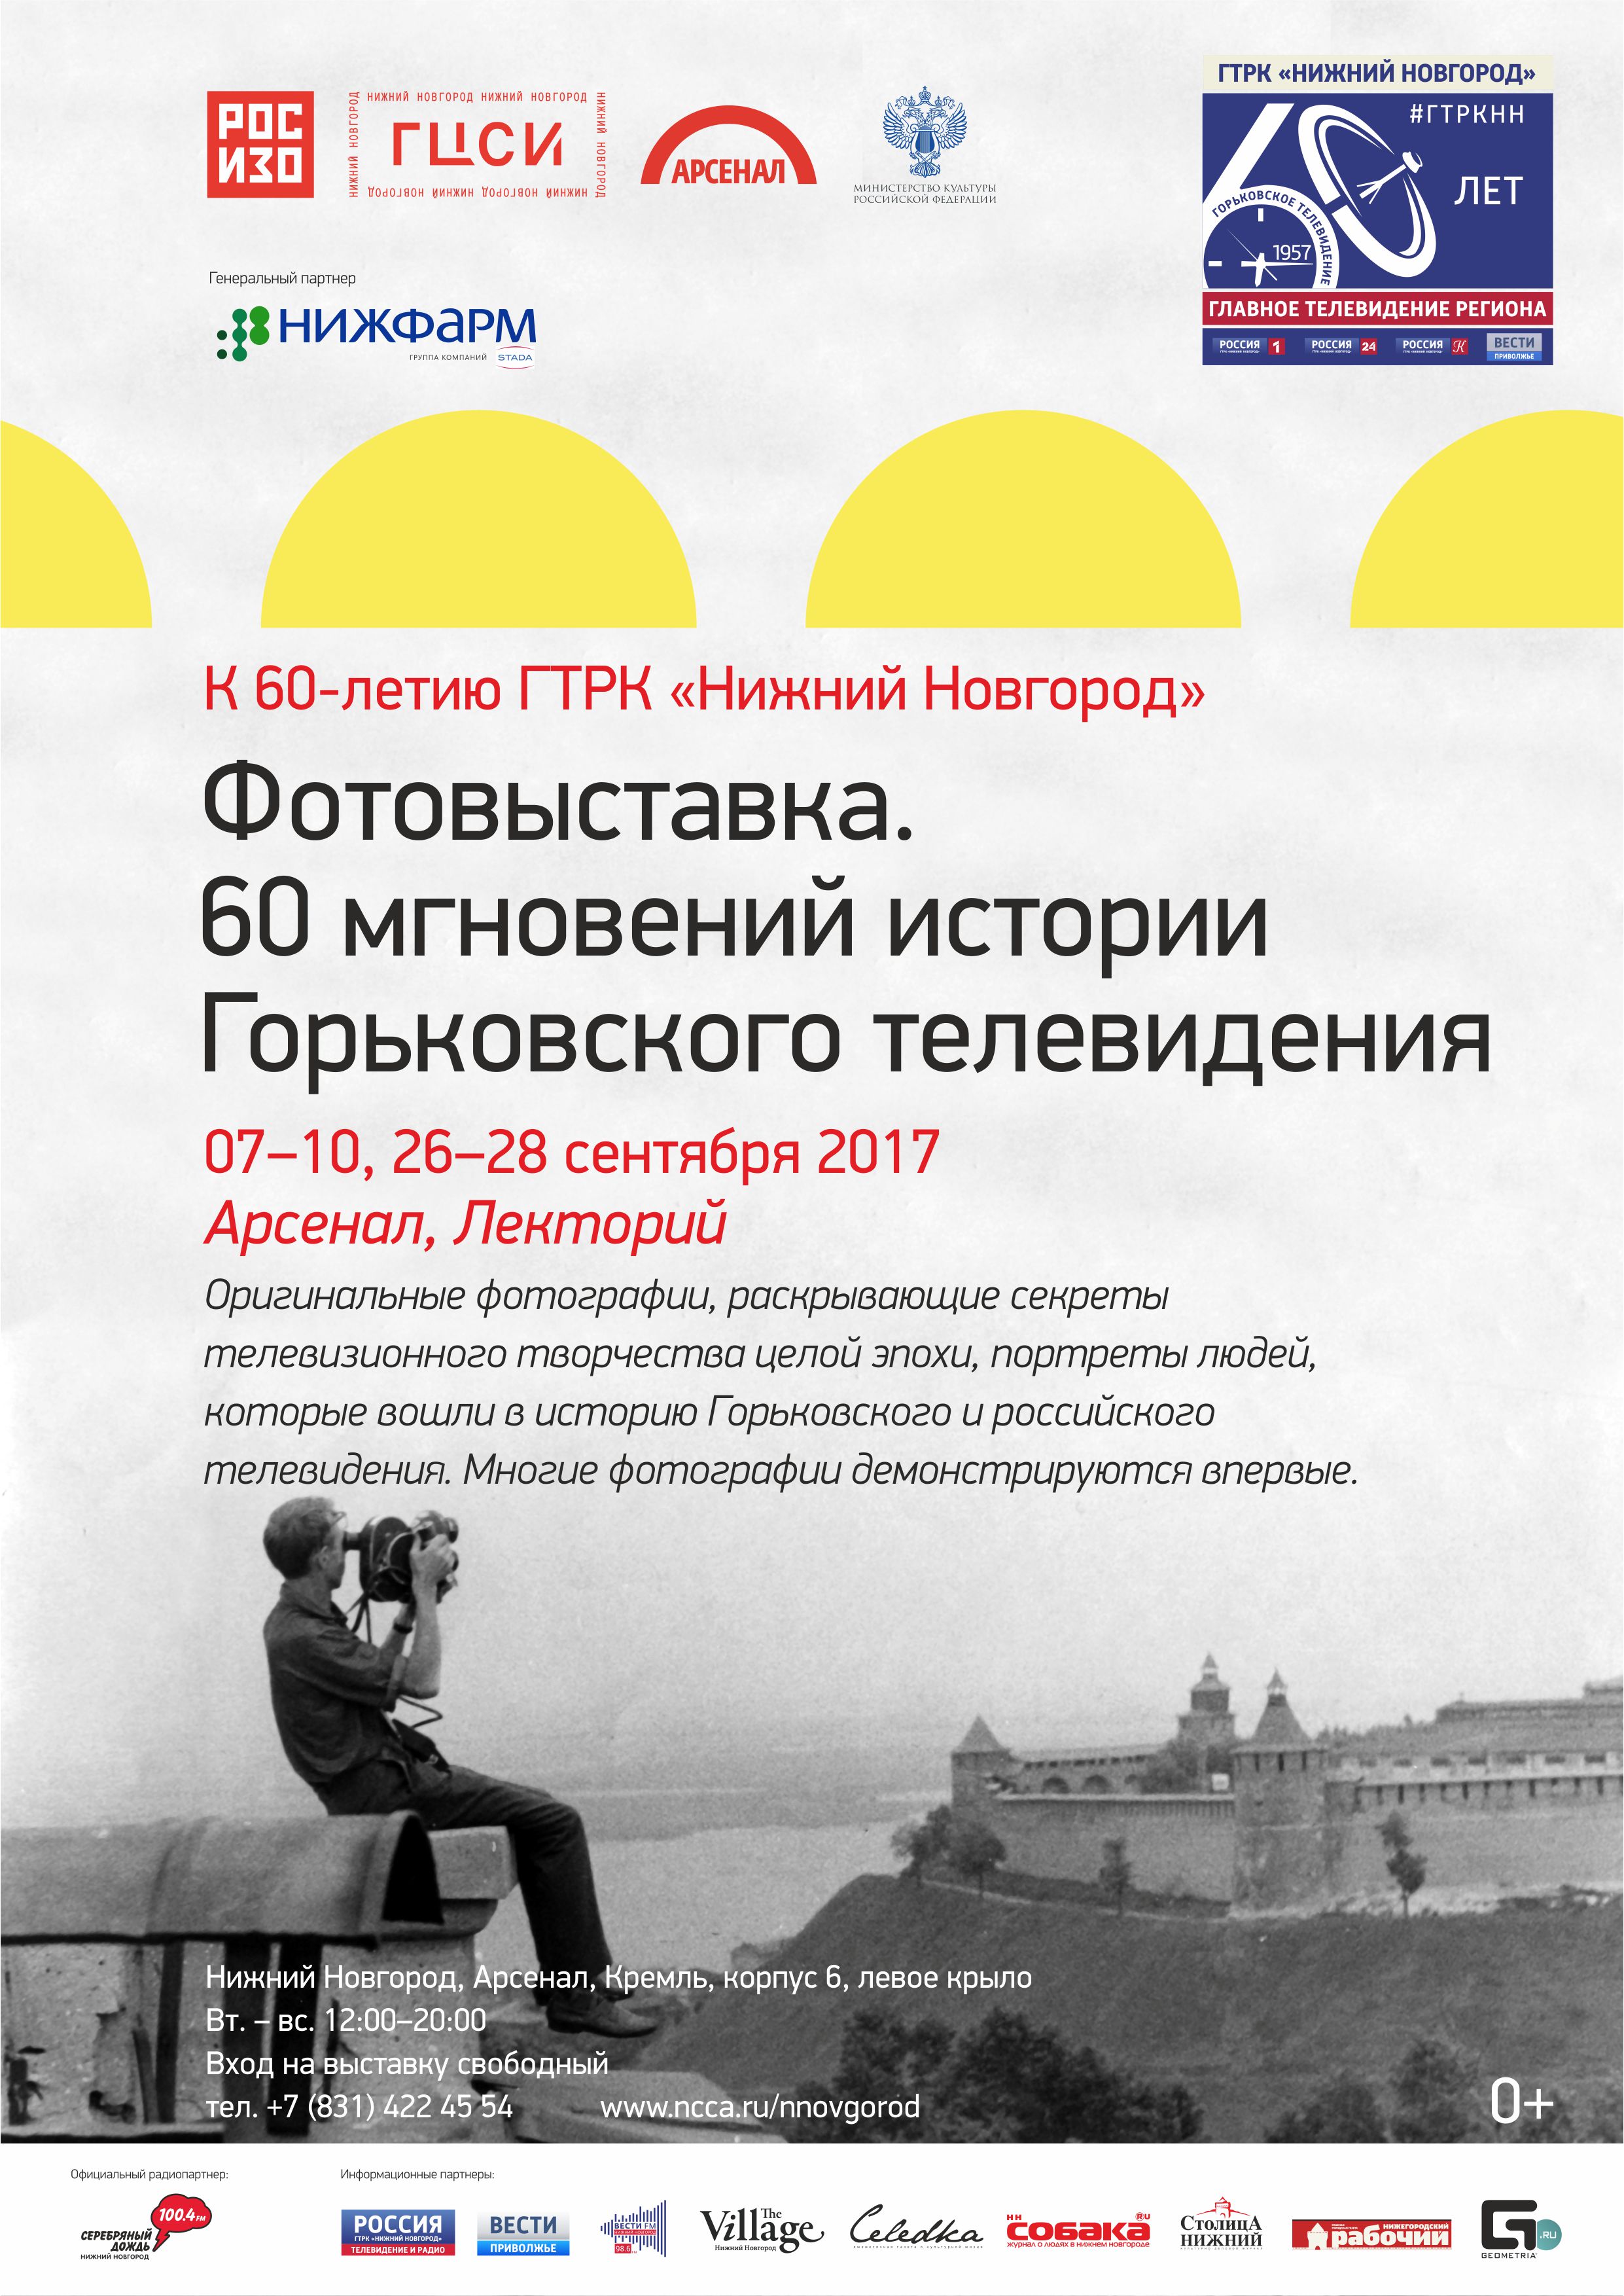 Exhibition “60 Moments of the History of Gorky Television”